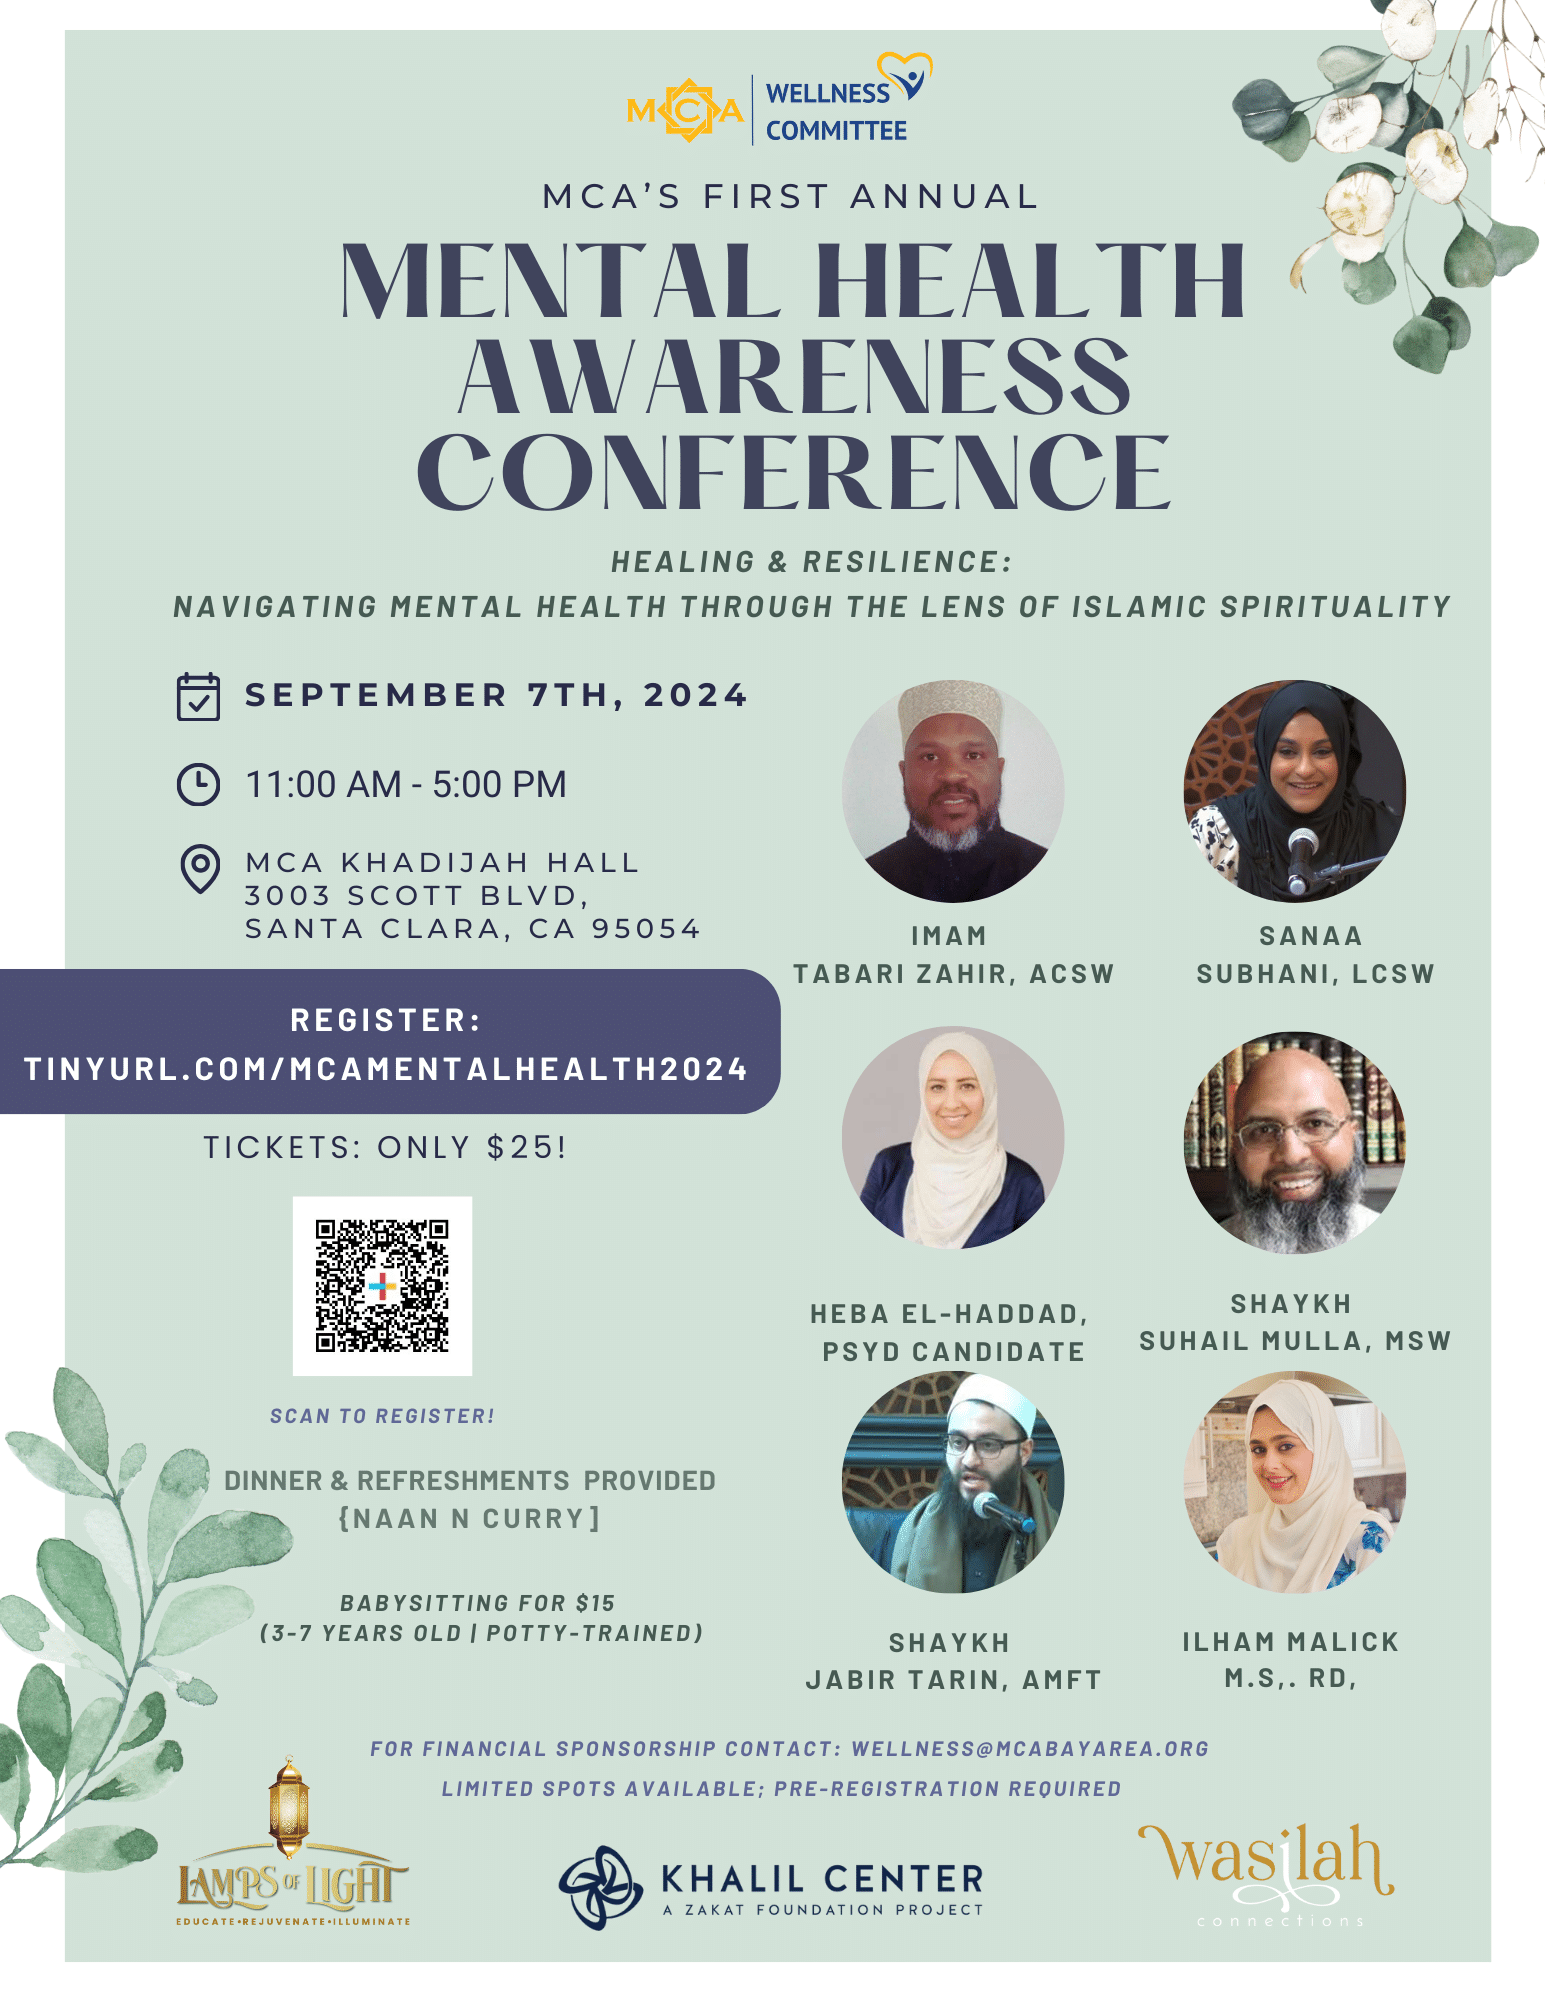 MENTAL HEALTH AWARENESS CONFERENCE